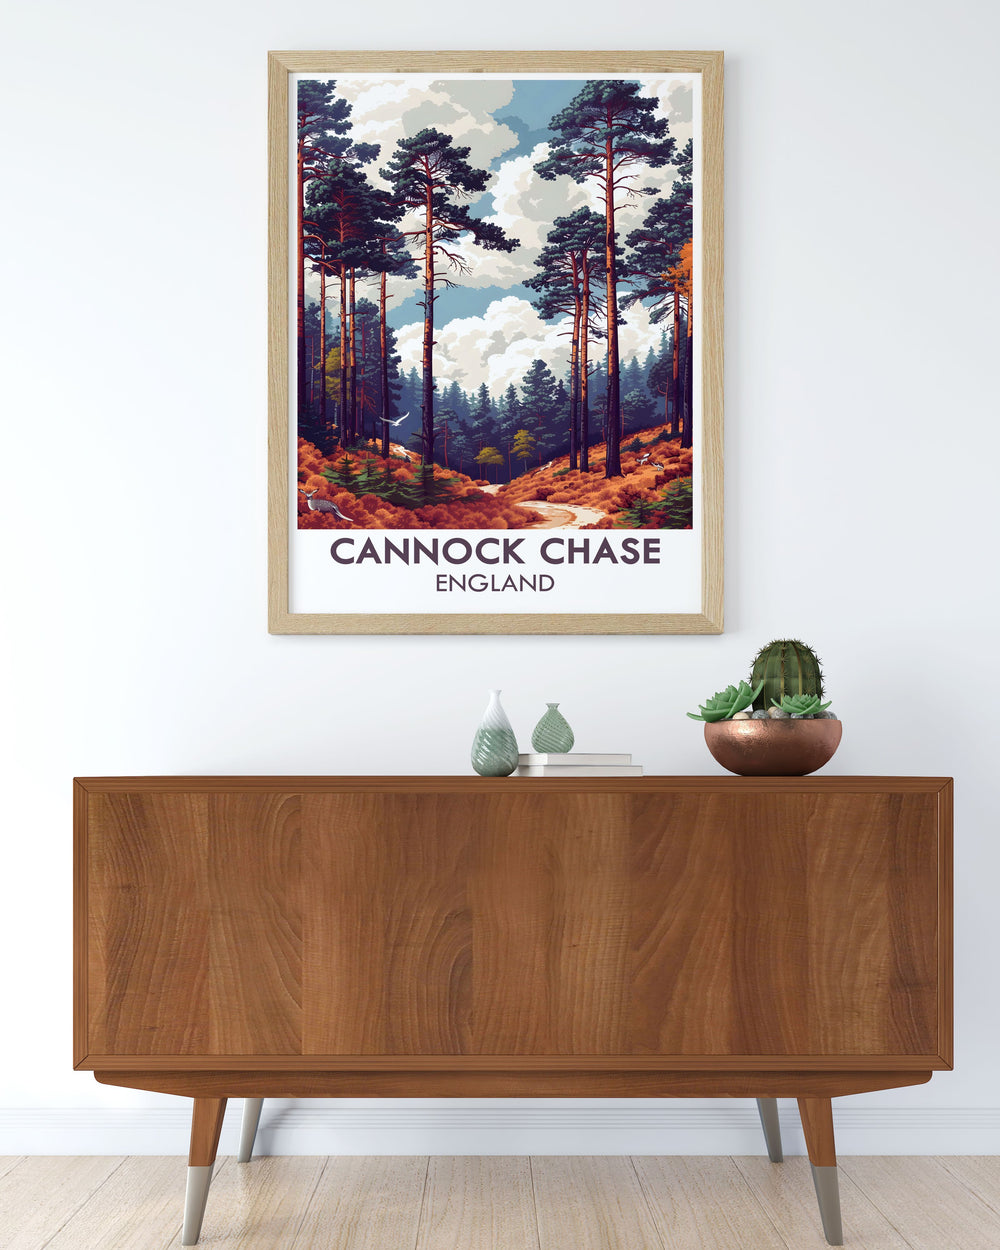 Bring The Chase into your home with this Cannock Chase print. This beautiful depiction of Staffordshires lush woodlands and diverse wildlife is ideal for nature lovers. Perfect for those who cherish the English countryside and UK wildlife.